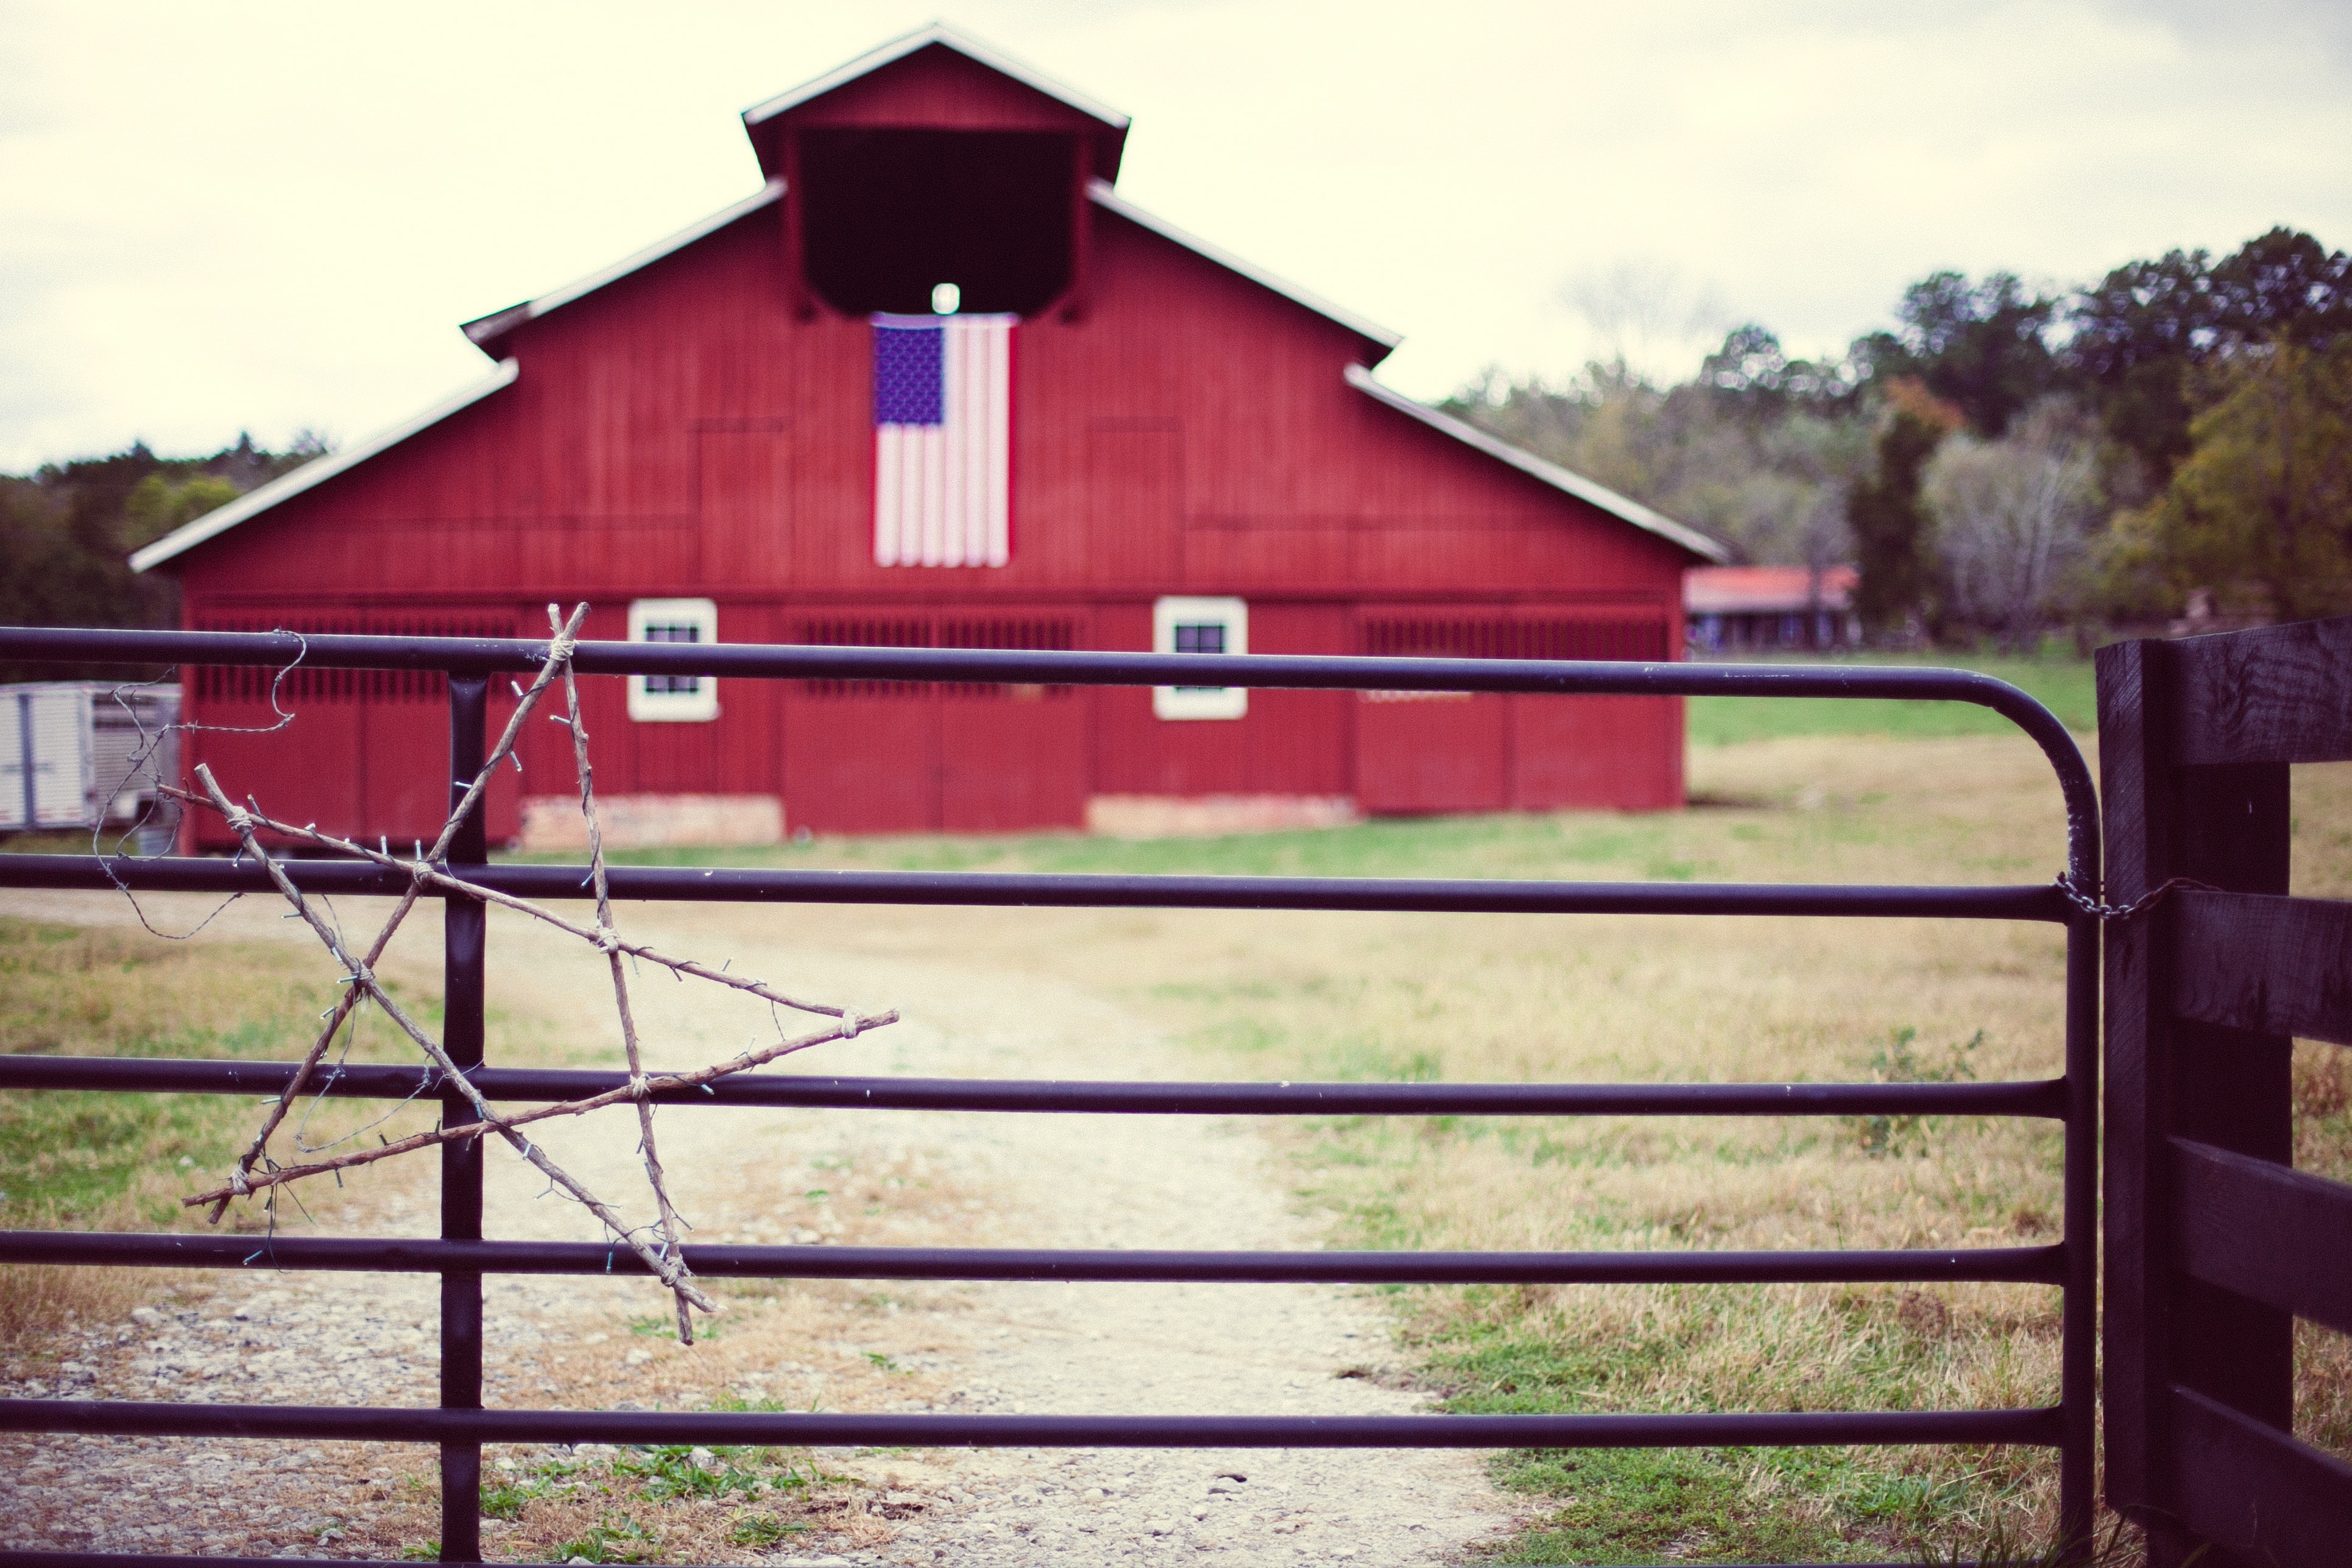 Countryside, American, Red, Barn, Farm, red, no people